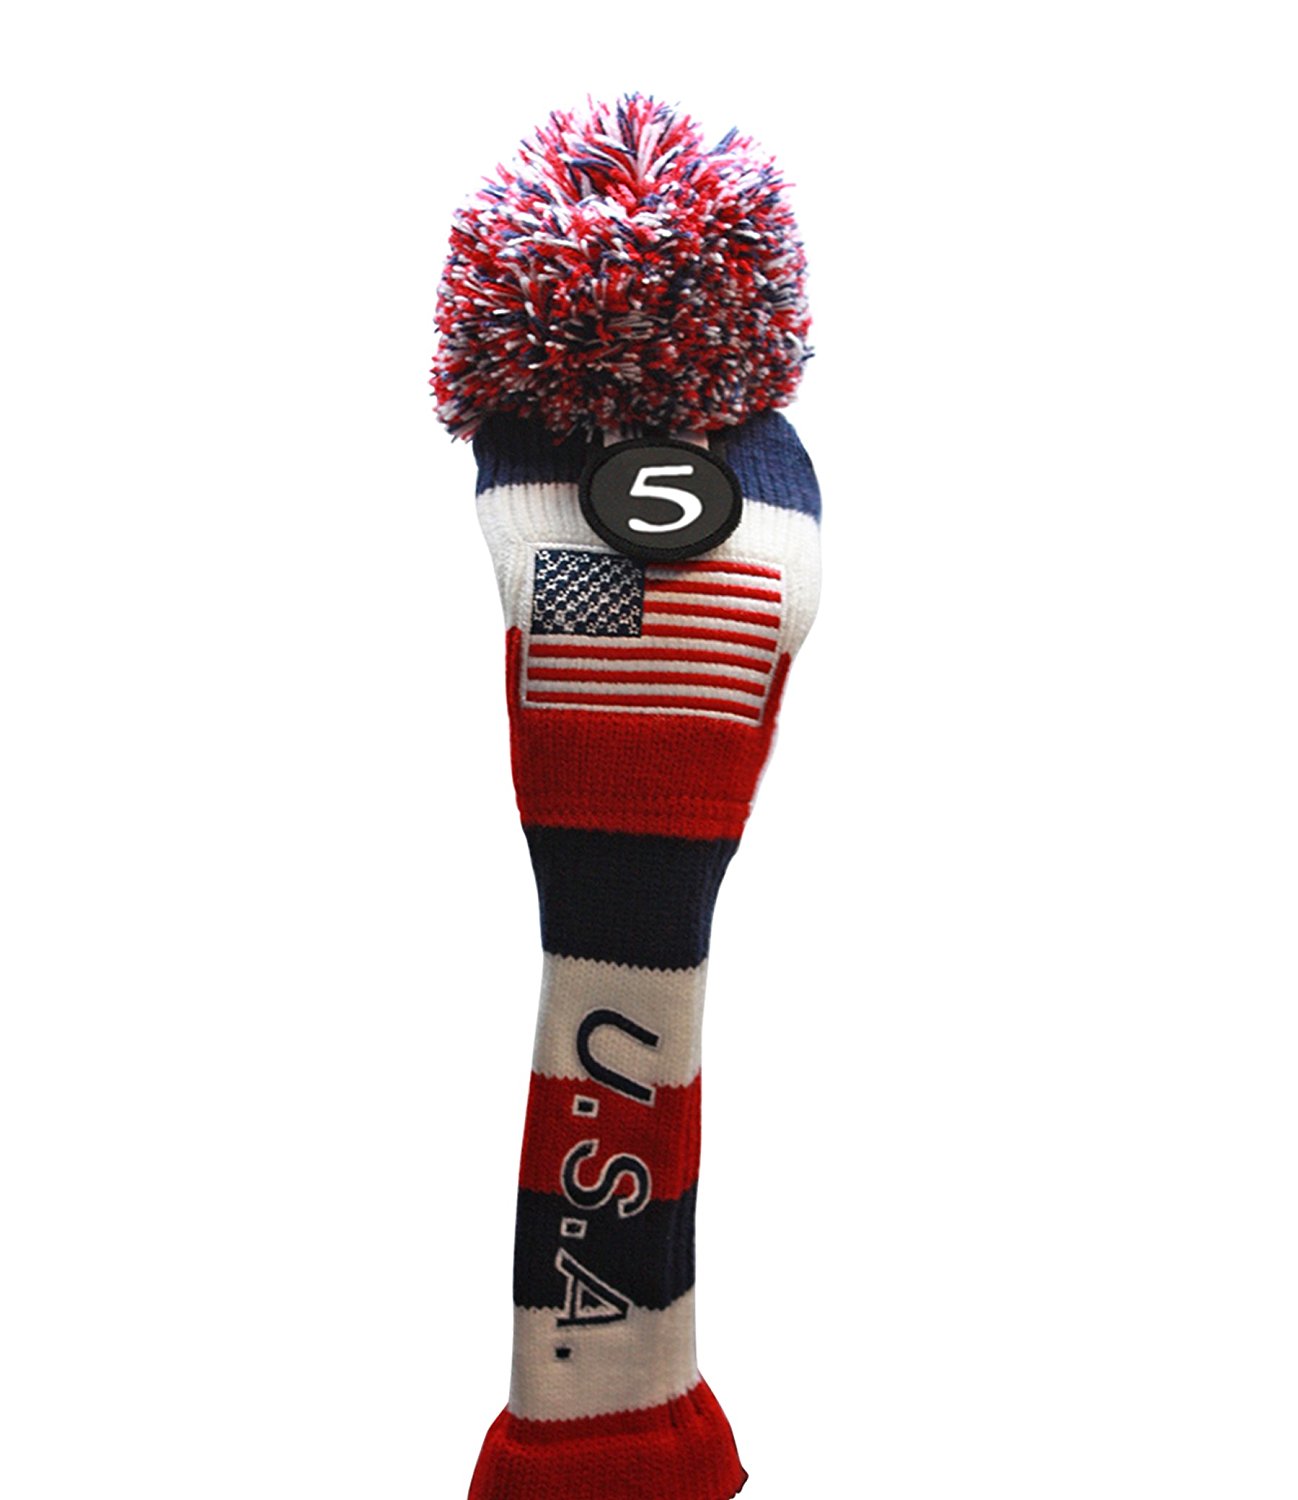 USA Majek Golf 3 5 X Fairway Woods Headcovers Pom Pom Knit Limited Edition Vintage Classic Traditional Flag Stars Red White Blue Stripes Retro Head Cover Fits 260cc Woods - image 3 of 7